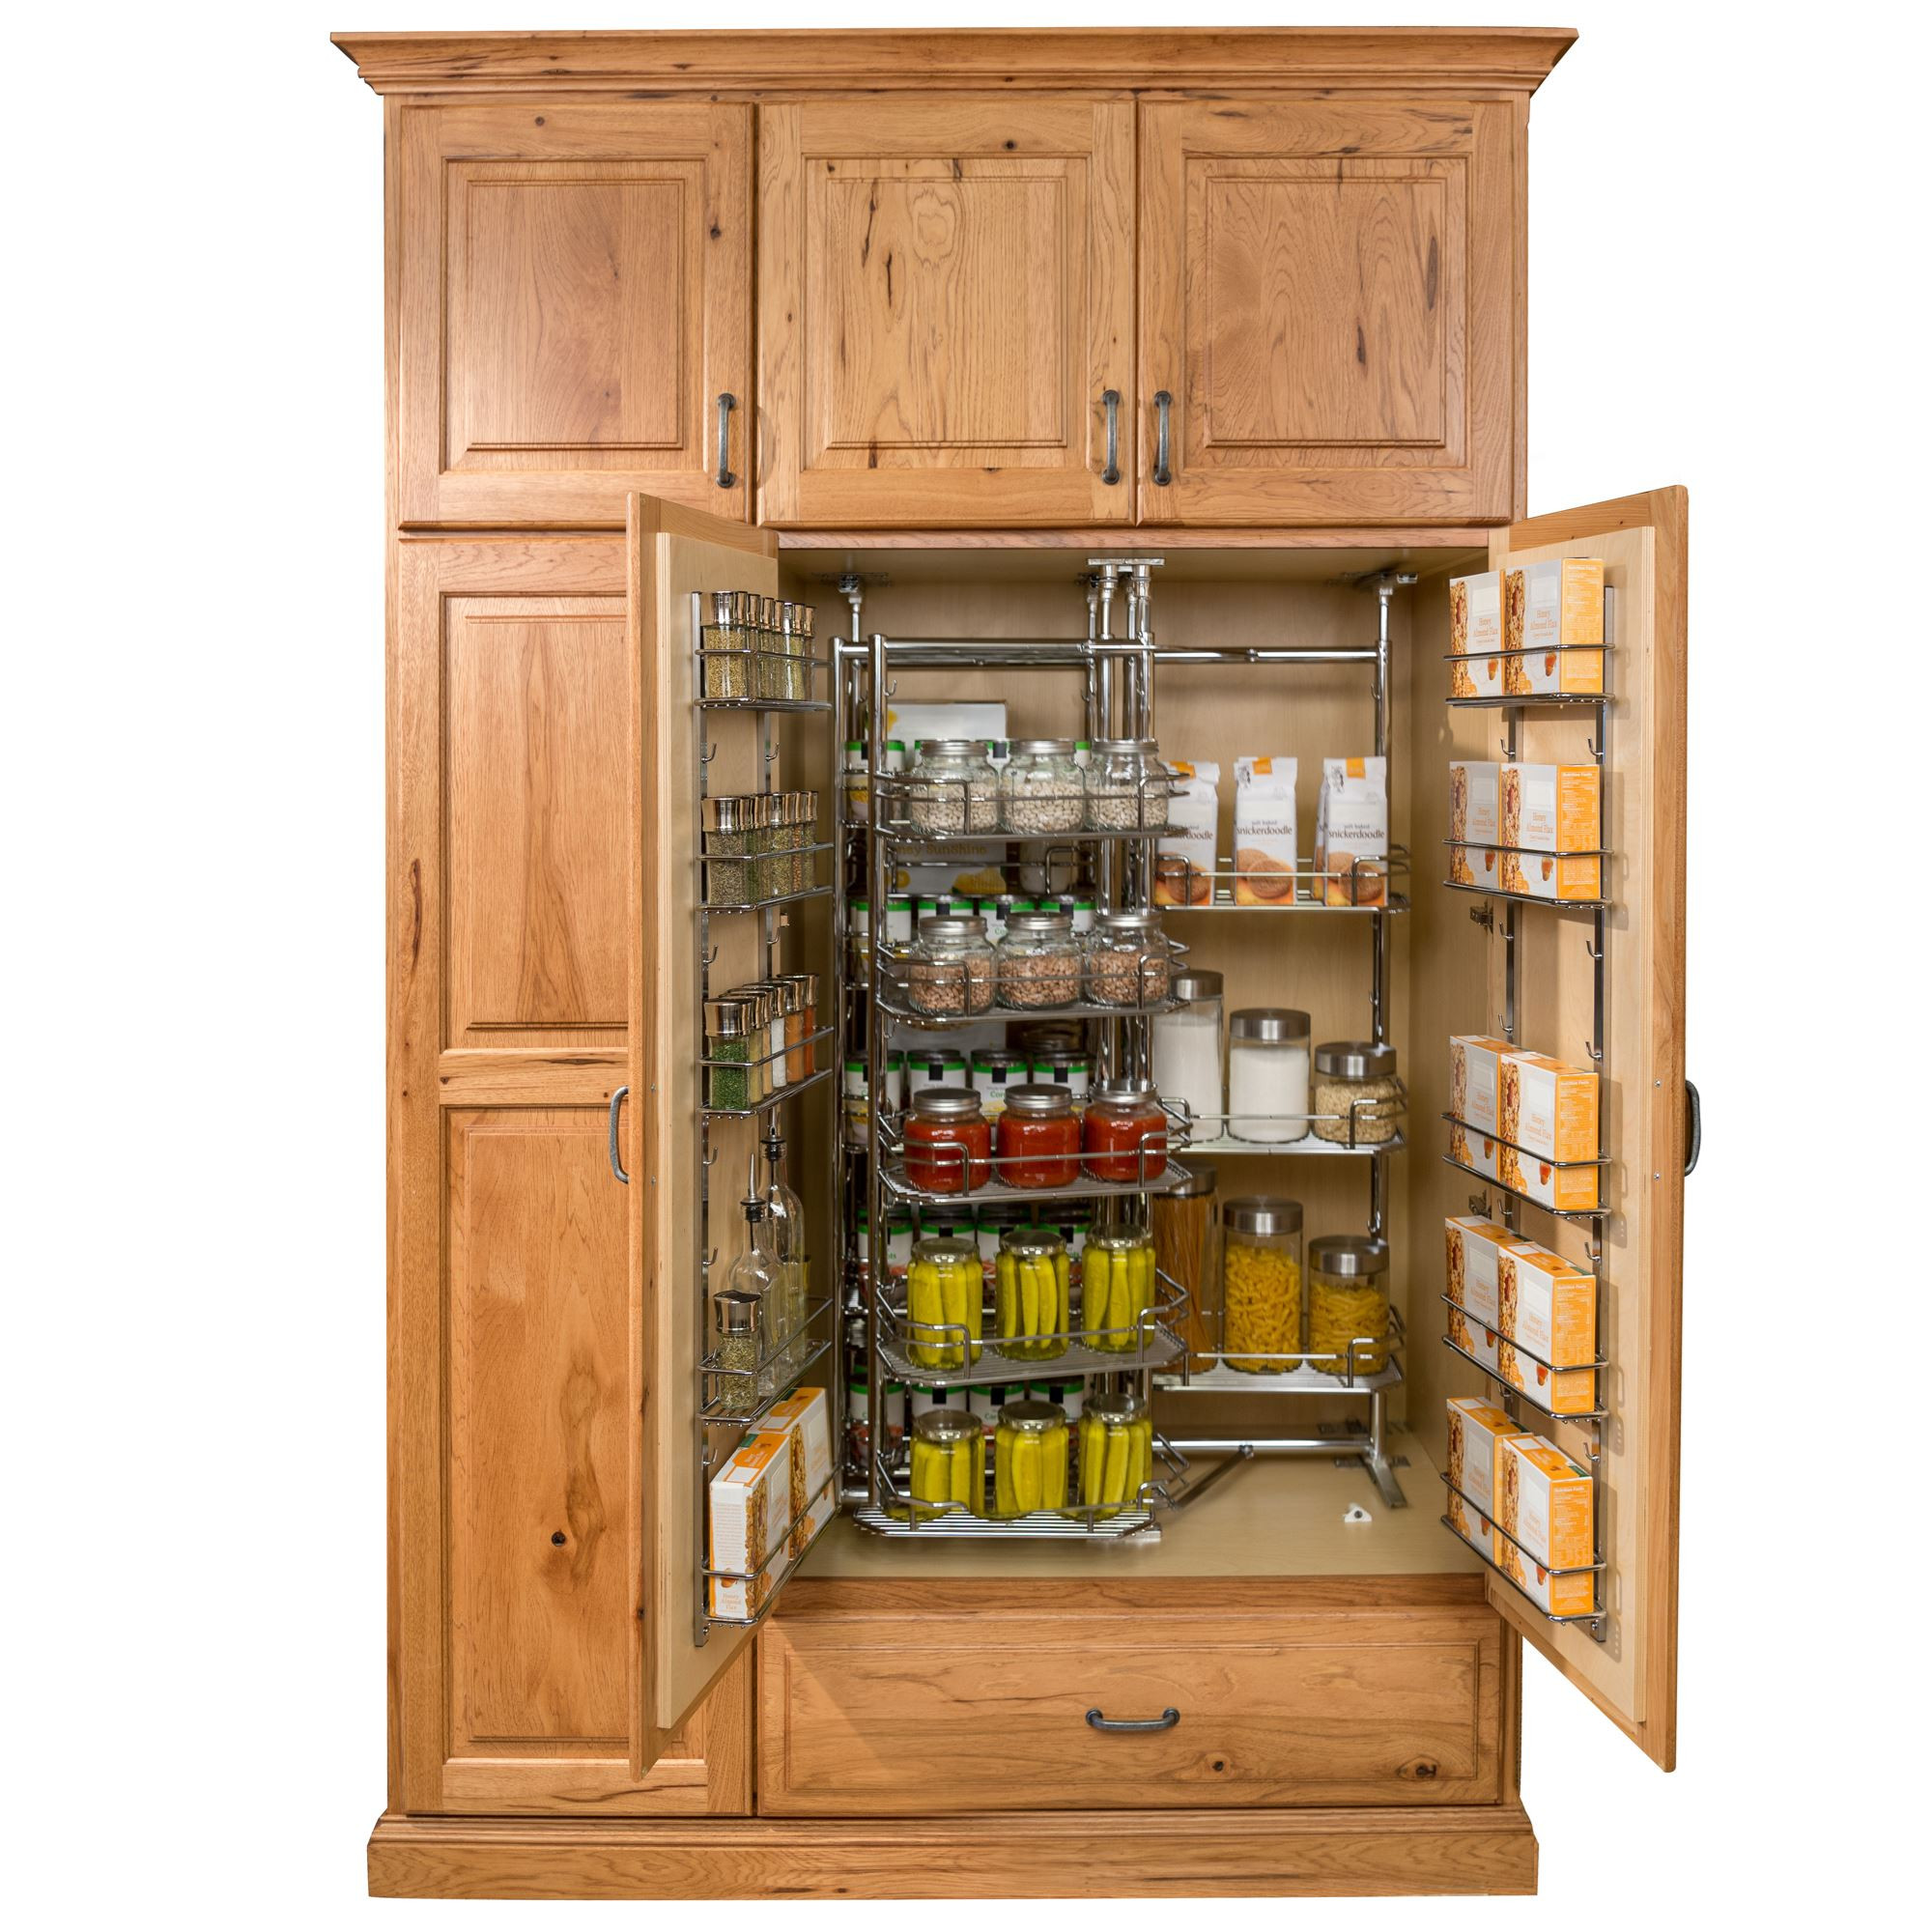 Kitchen Storage Cabinets Pantry
 Pantry and Food Storage Storage Solutions